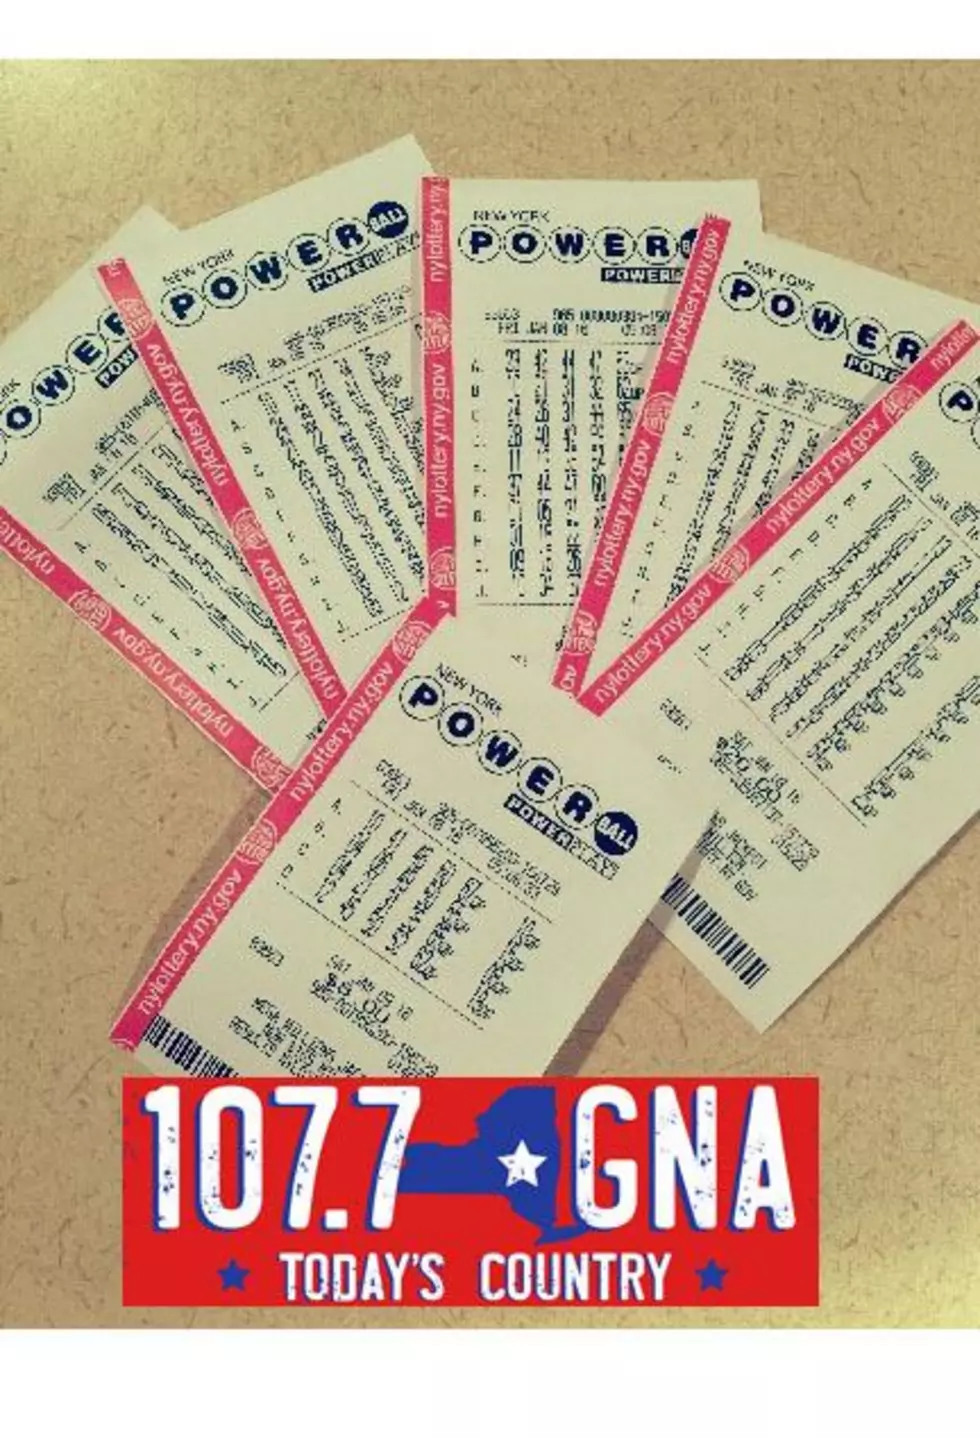 Here Are The Winners In The WGNA Powerball Pool –  Let’s Hope It’s You!